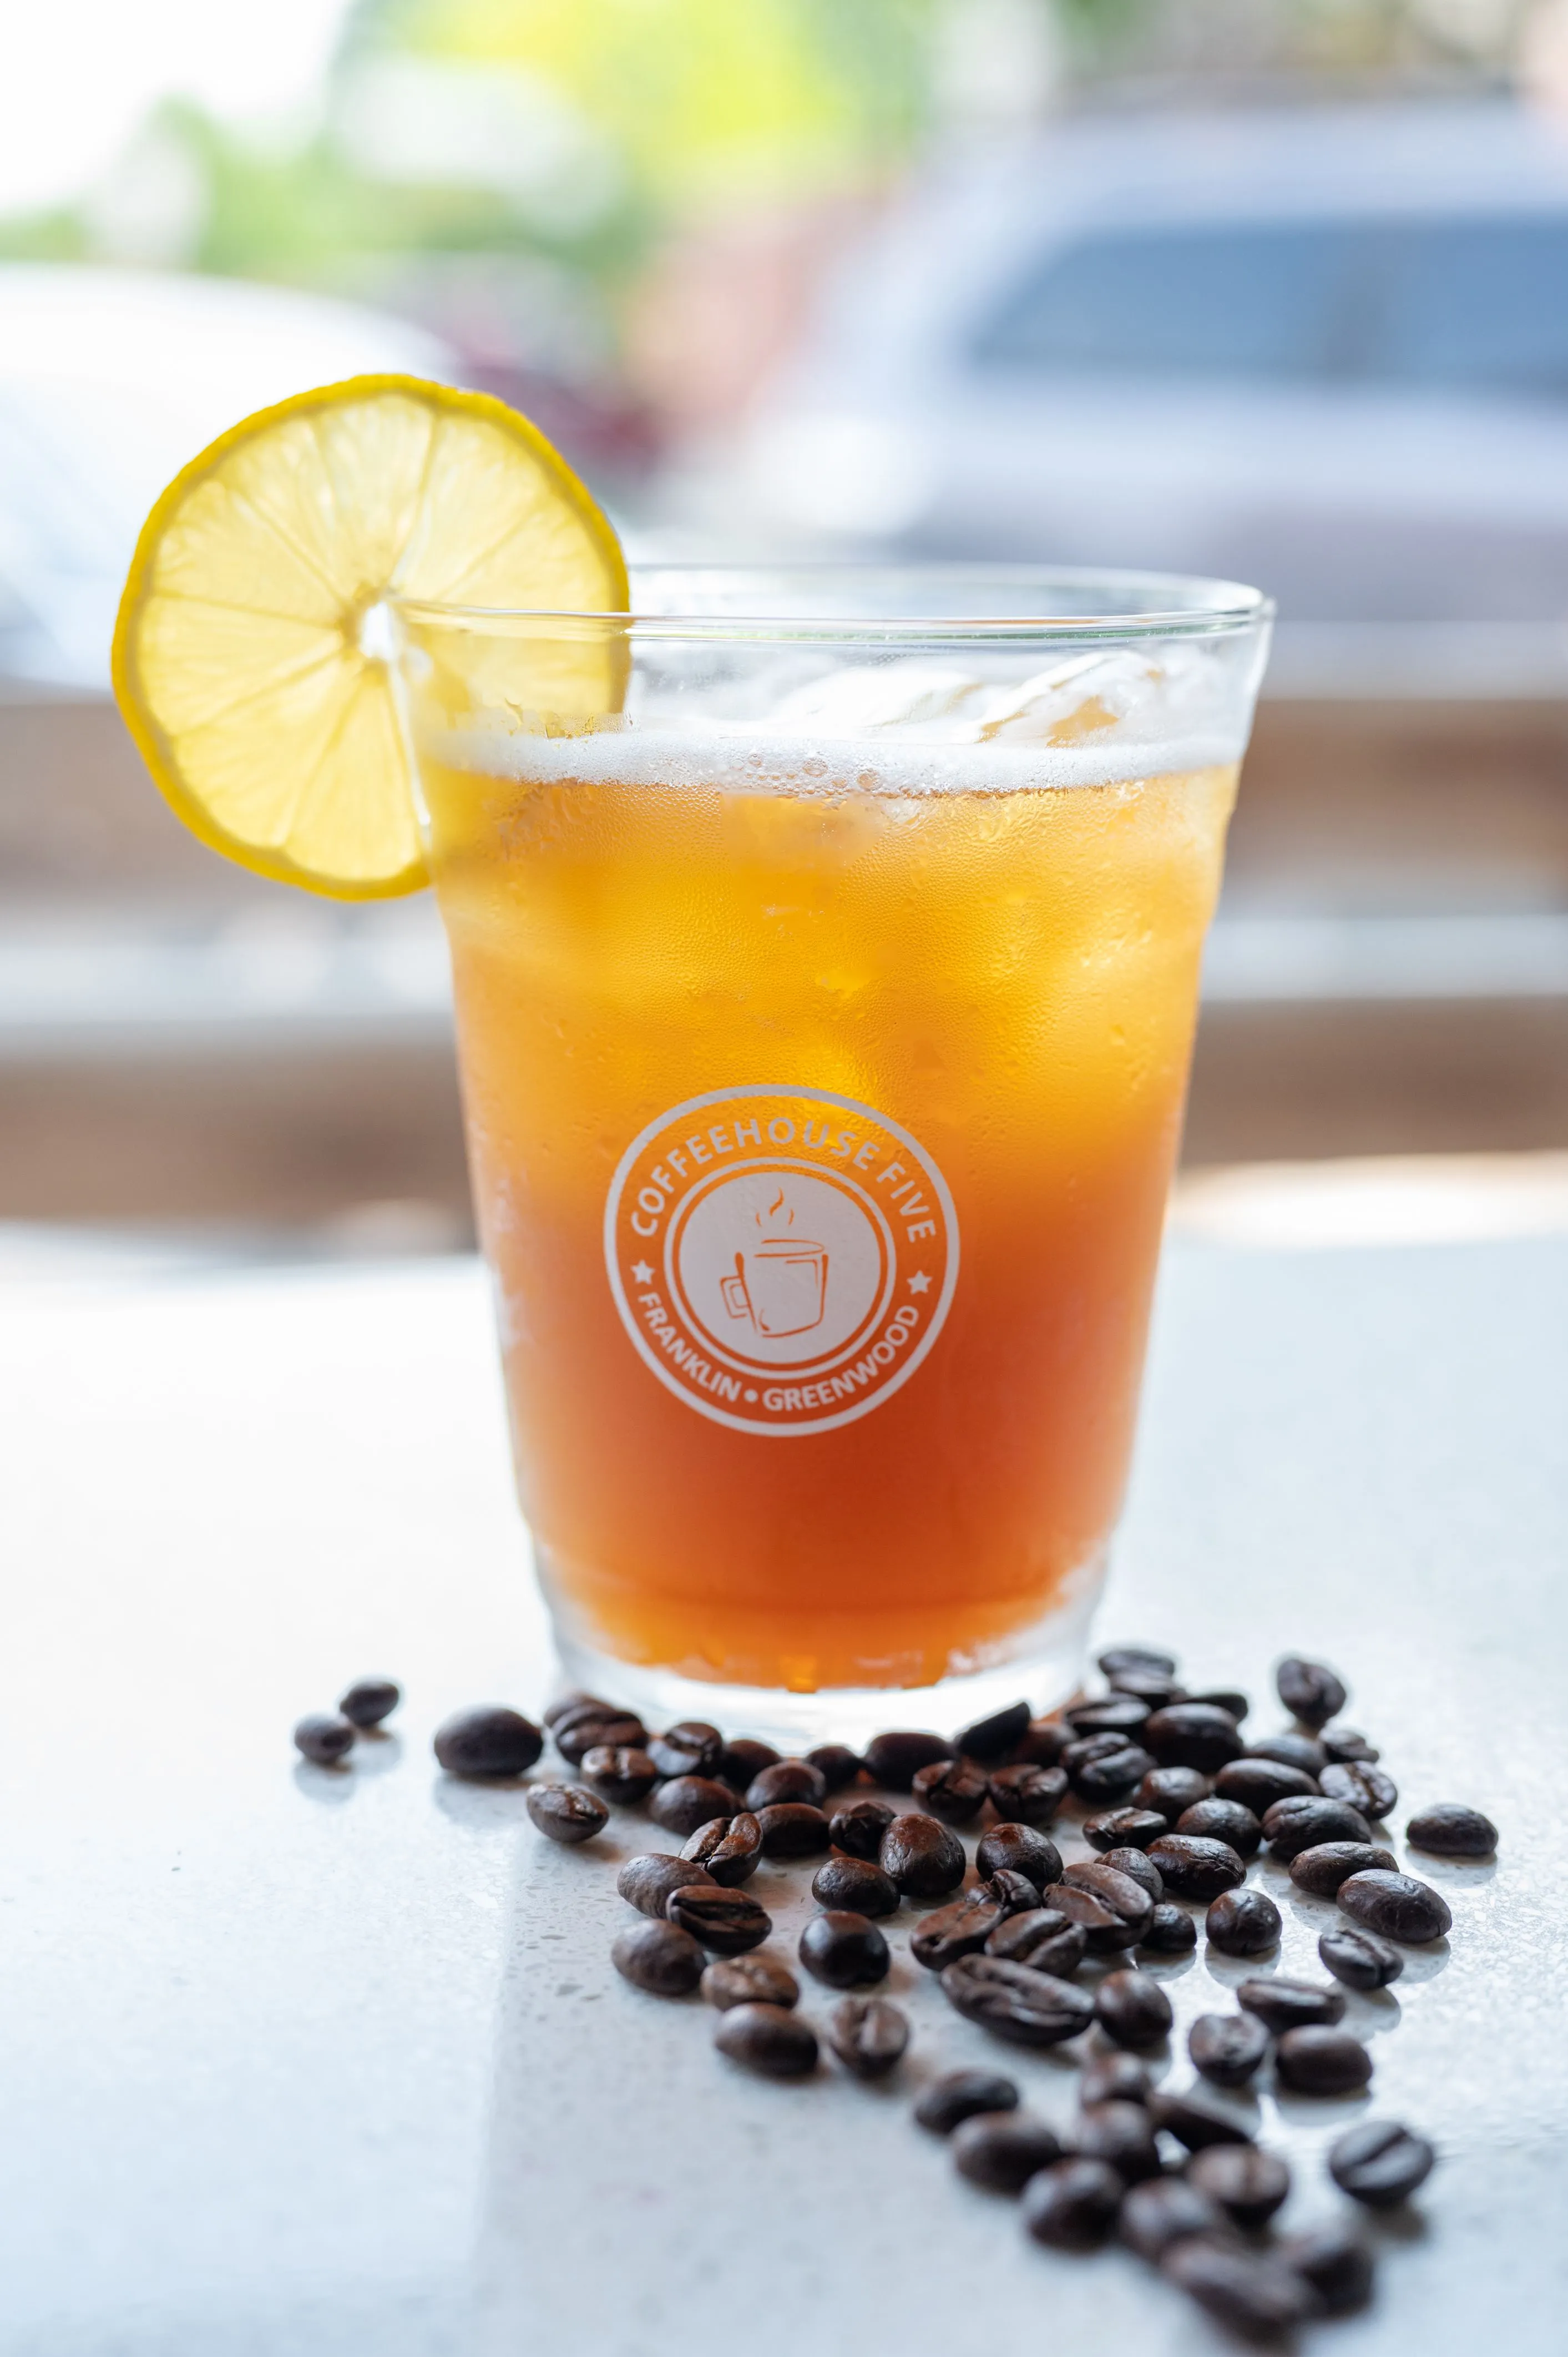 Iced coffee in a glass with a logo, garnished with a lemon slice, surrounded by coffee beans on a table, with a blurred background.